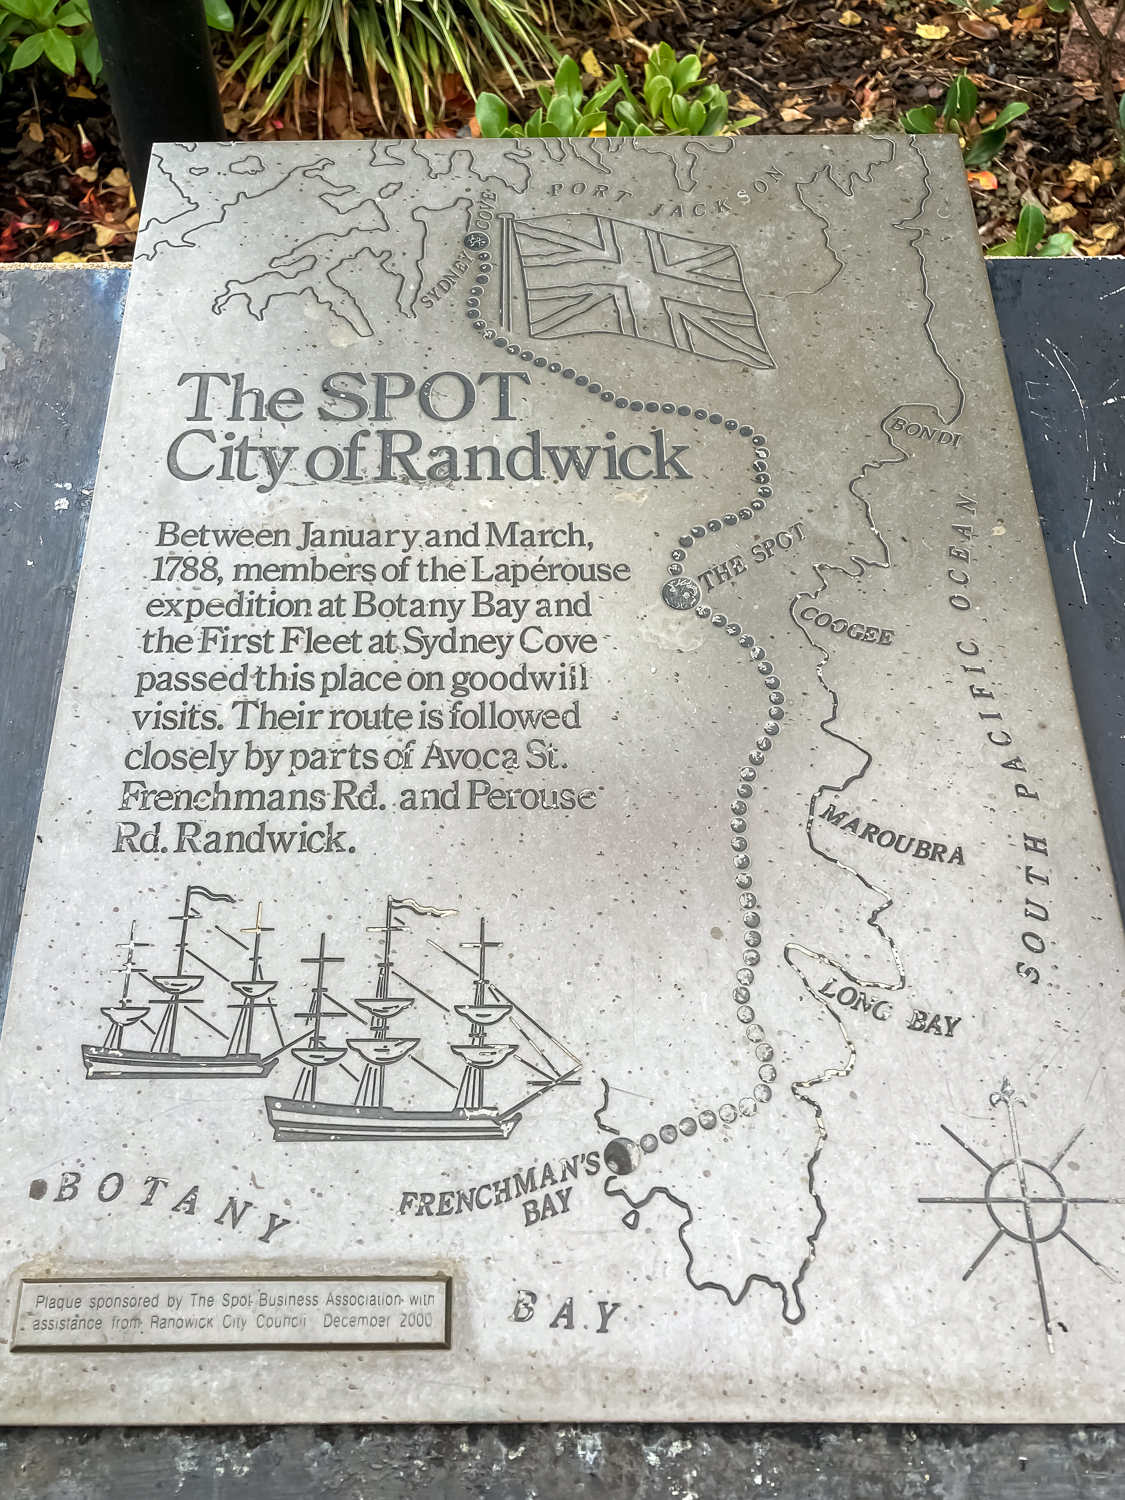 The Spot: City of Randwick. A silver plaque with a map of the Sydney coast describing goodwill visits passing through this area in 1788